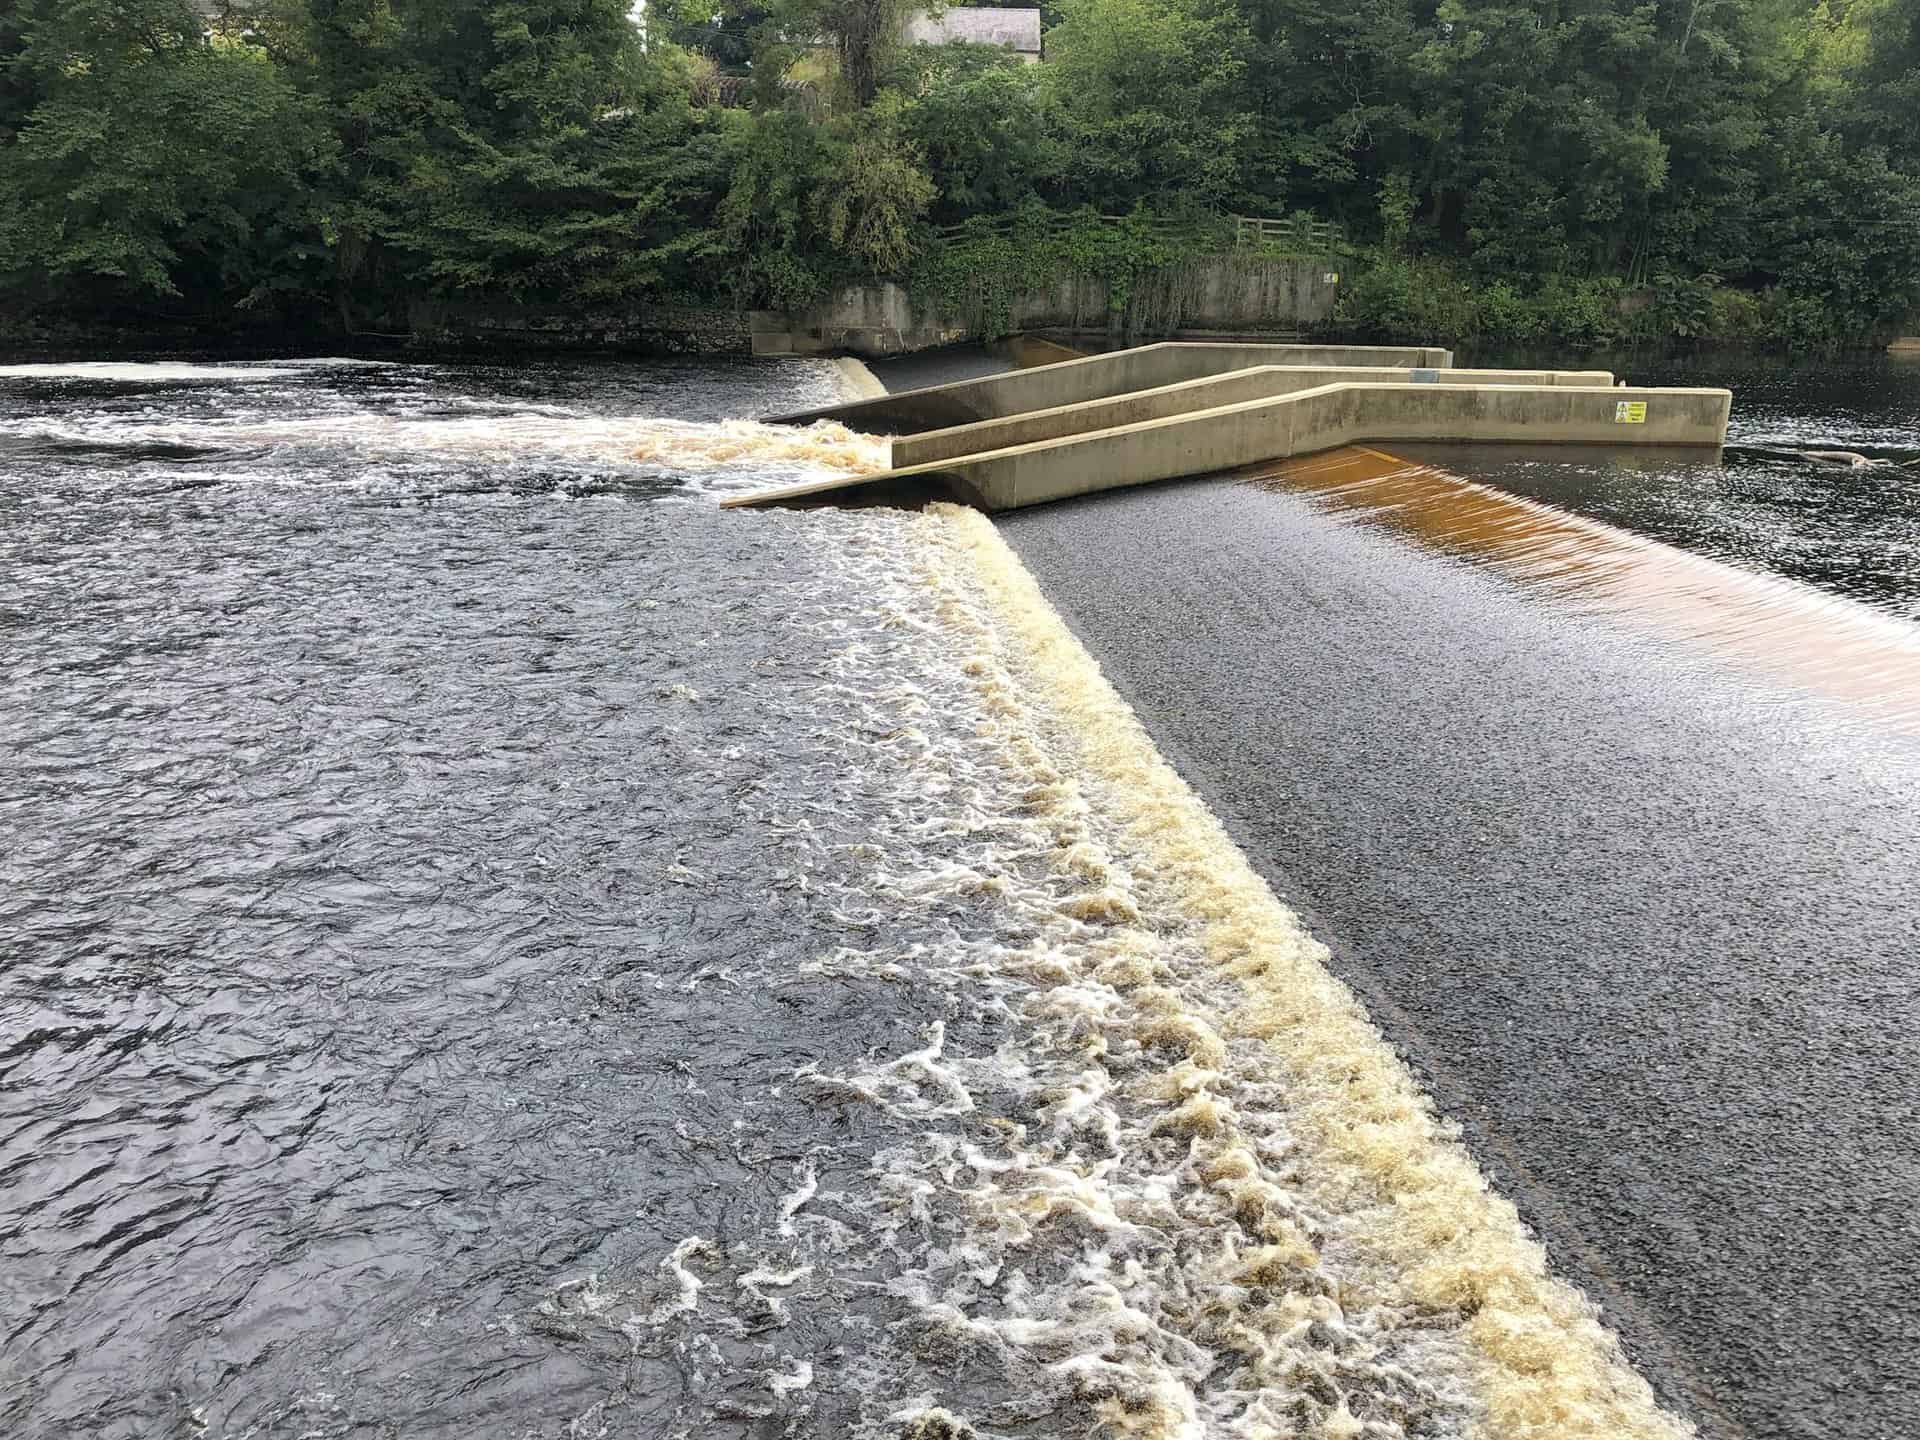 Barnard Castle weir, part of a gauging station that measures the depth and flow of the River Tees.